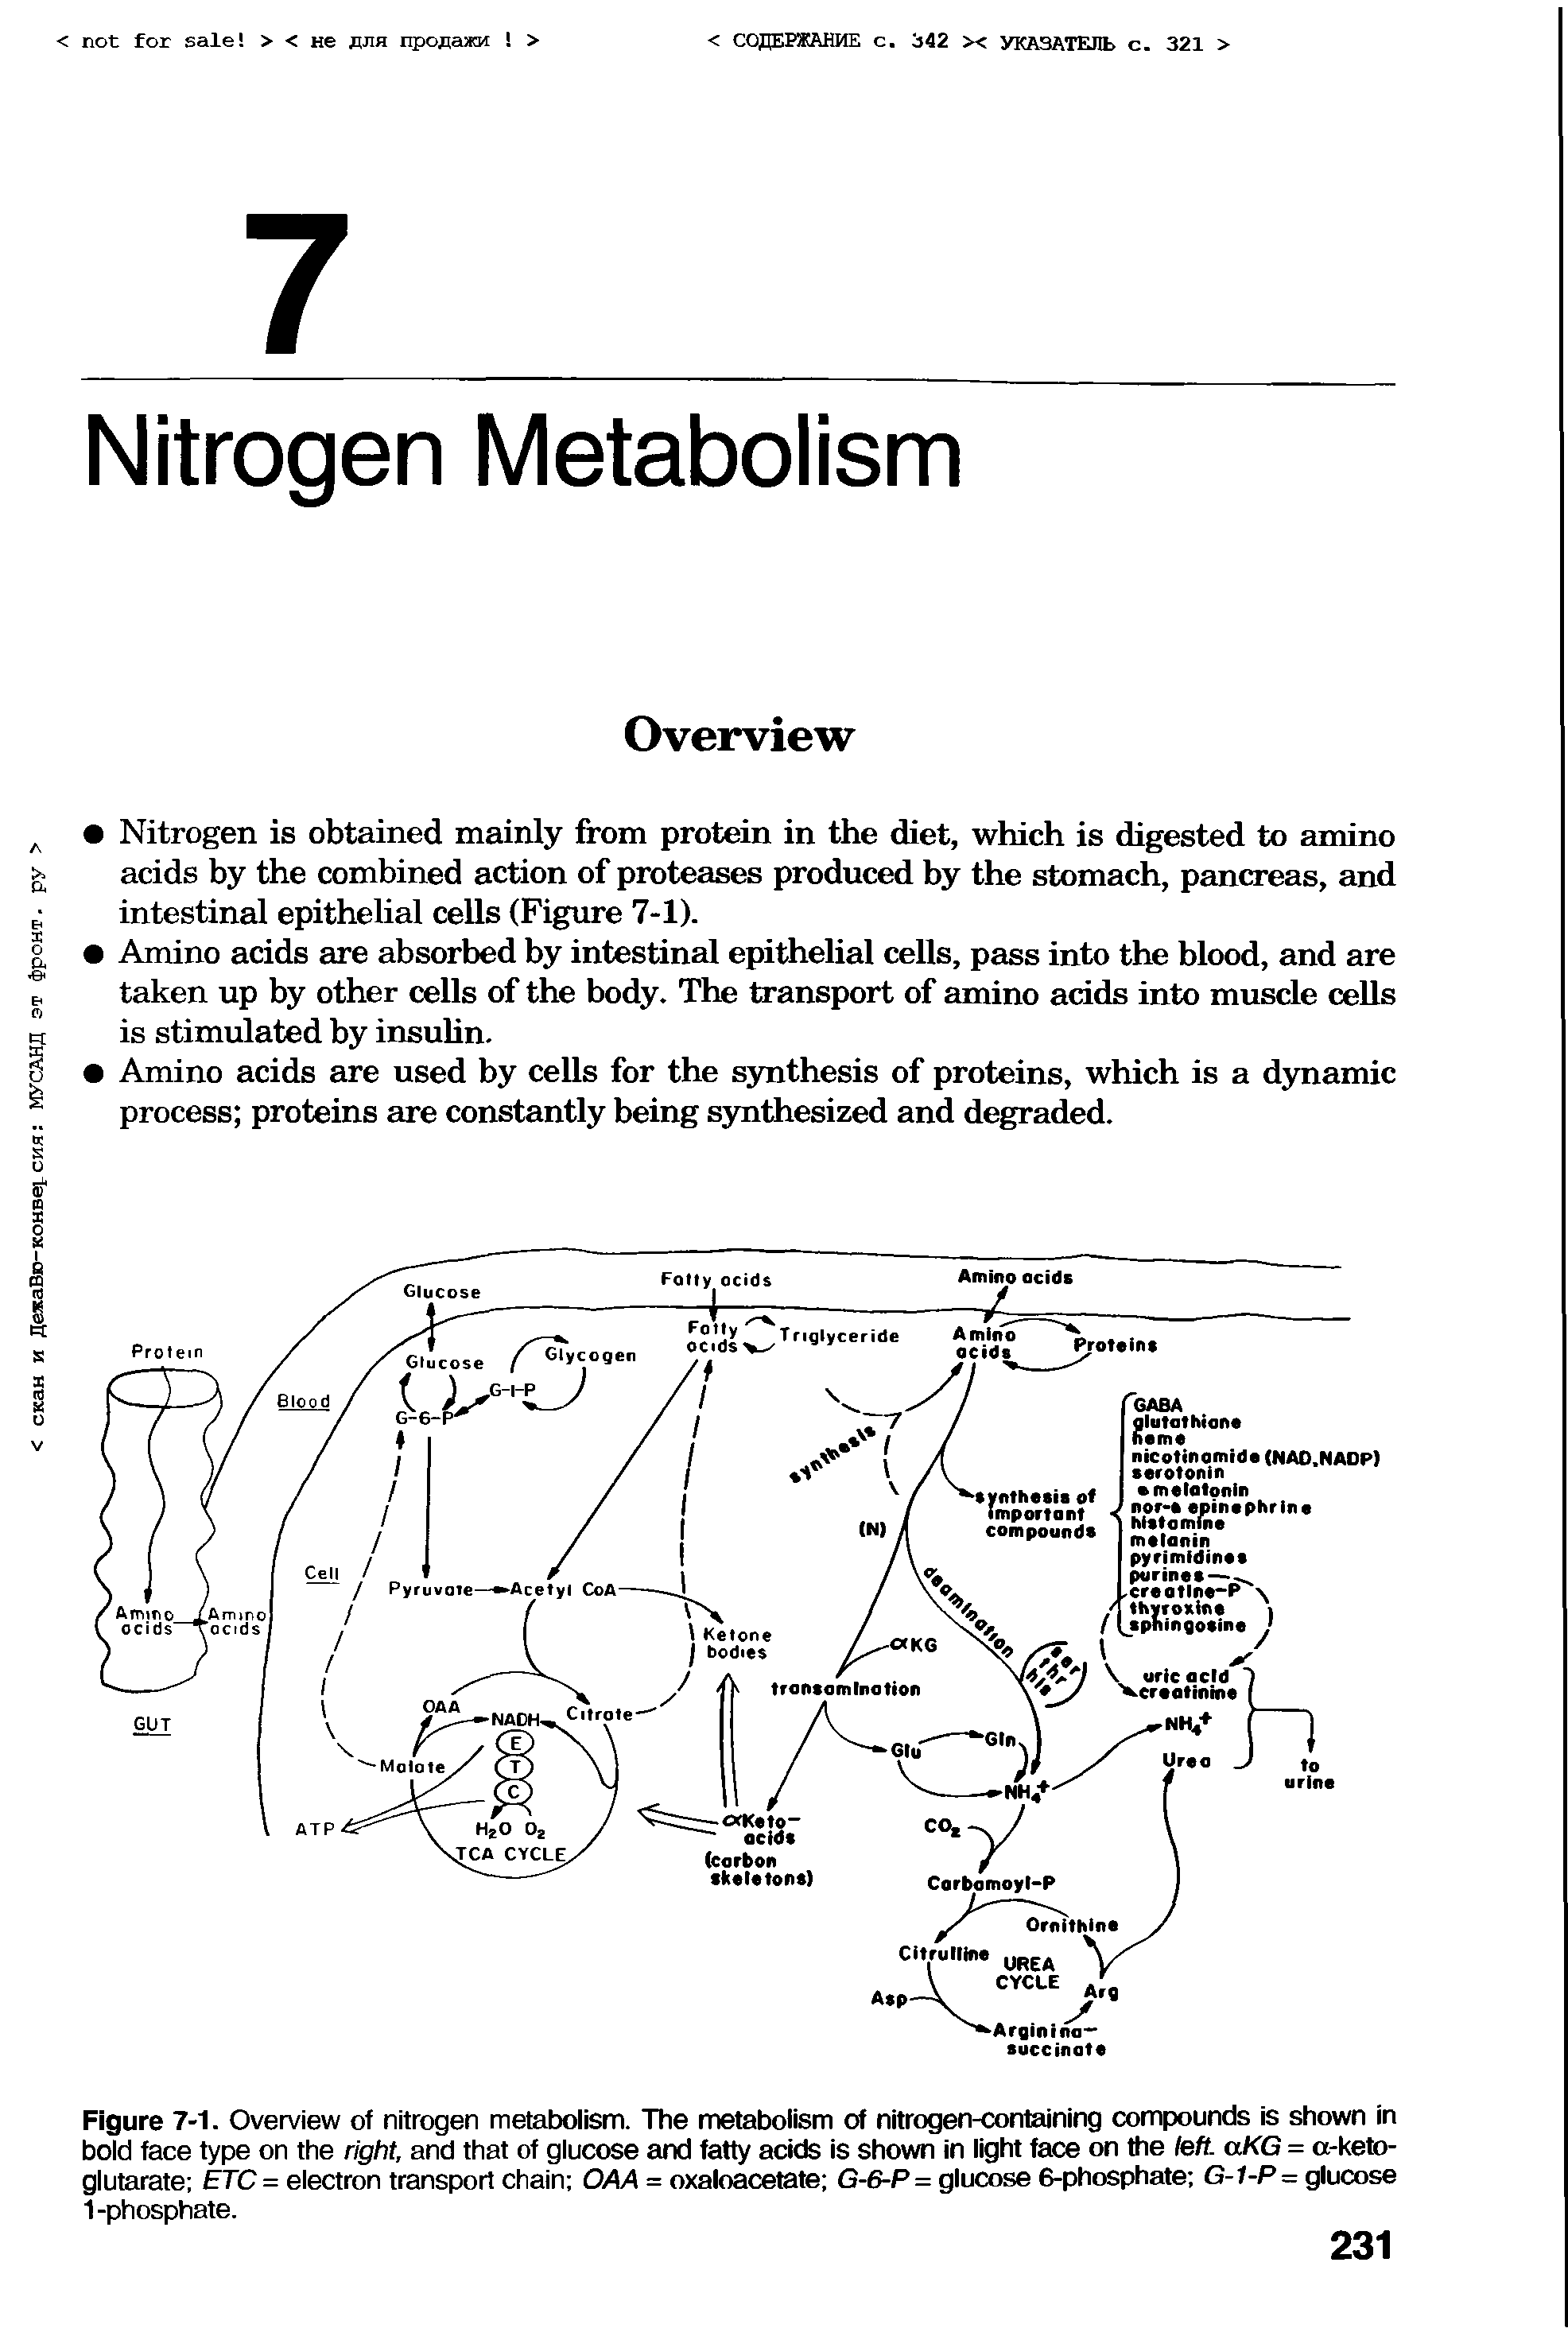 Figure 7-1. Overview of nitrogen metabolism. The metabolism of nitrogen-containing compounds is shown in bold face type on the right, and that of glucose and fatty acids is shown in light face on the left. aKG = a-keto-glutarate ETC = electron transport chain OAA = oxaloacetate G-6-P = glucose 6-phosphate G-1-P= glucose 1-phosphate.